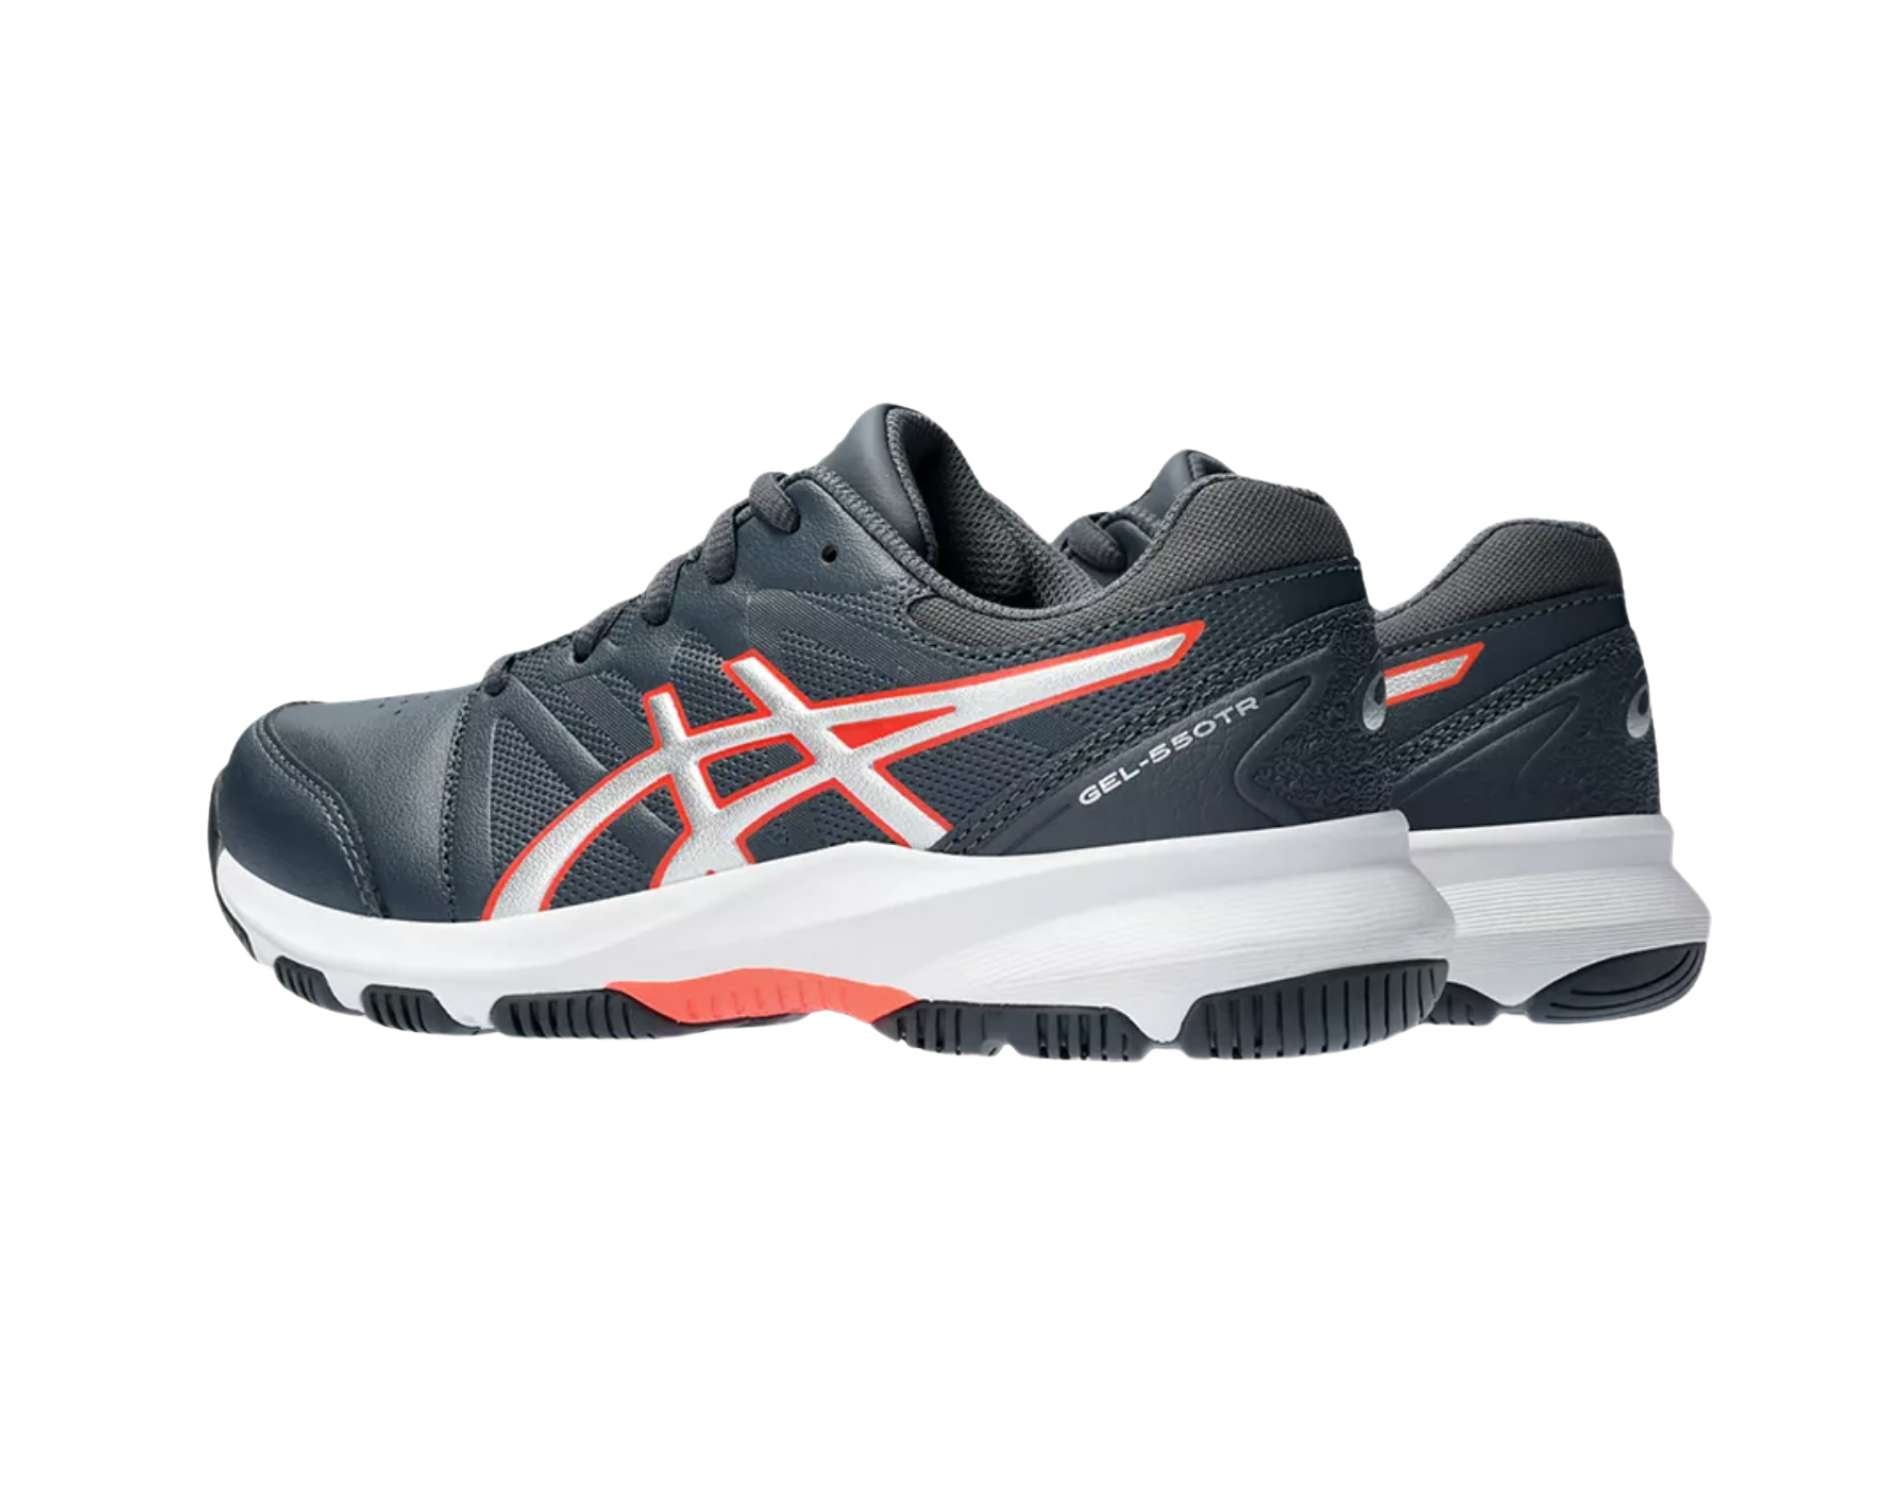 Asics Gel-550 tr gs kids running shoe in carrier grey pure silver colour